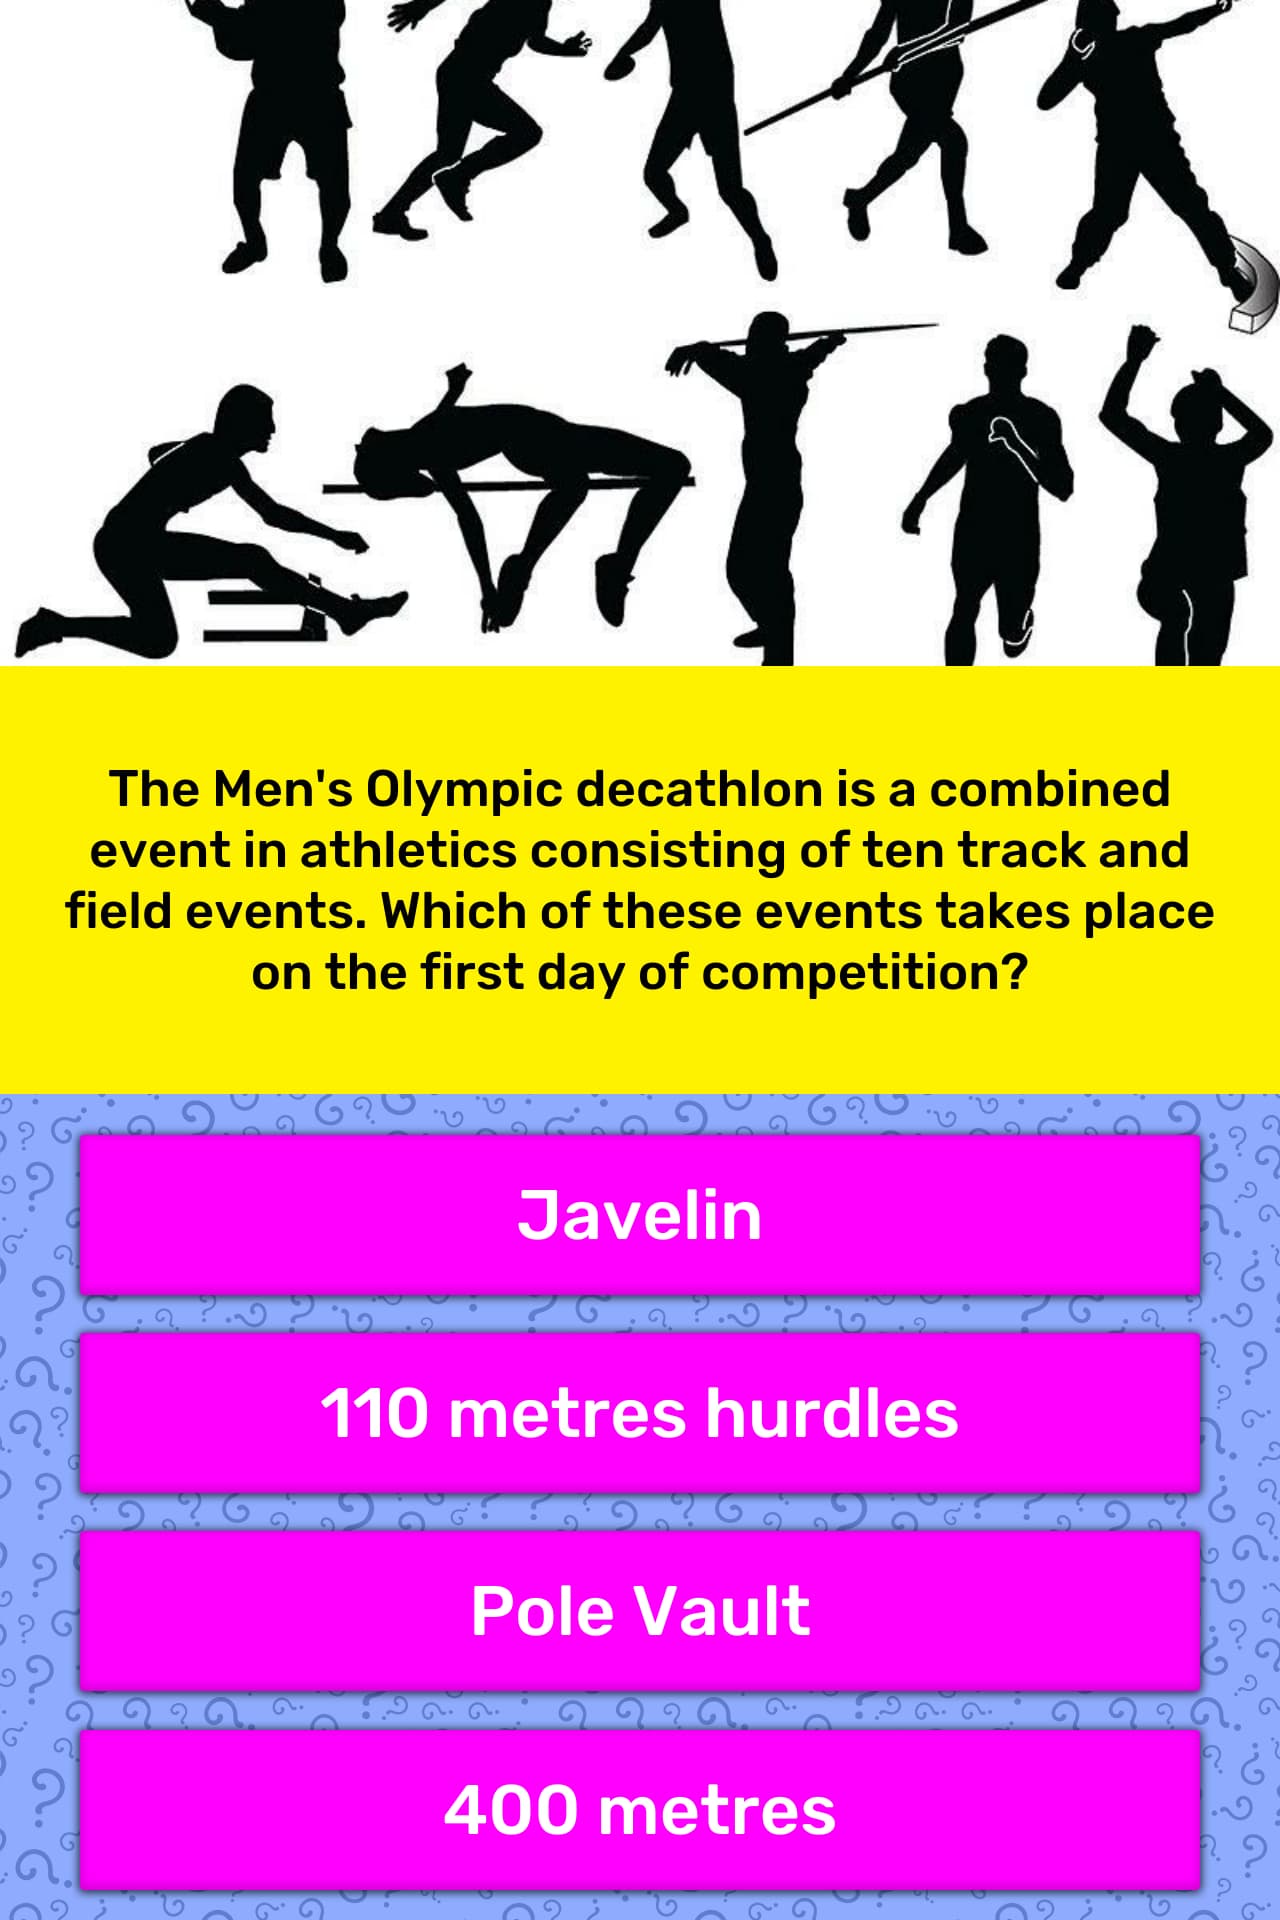 10 events in the decathlon